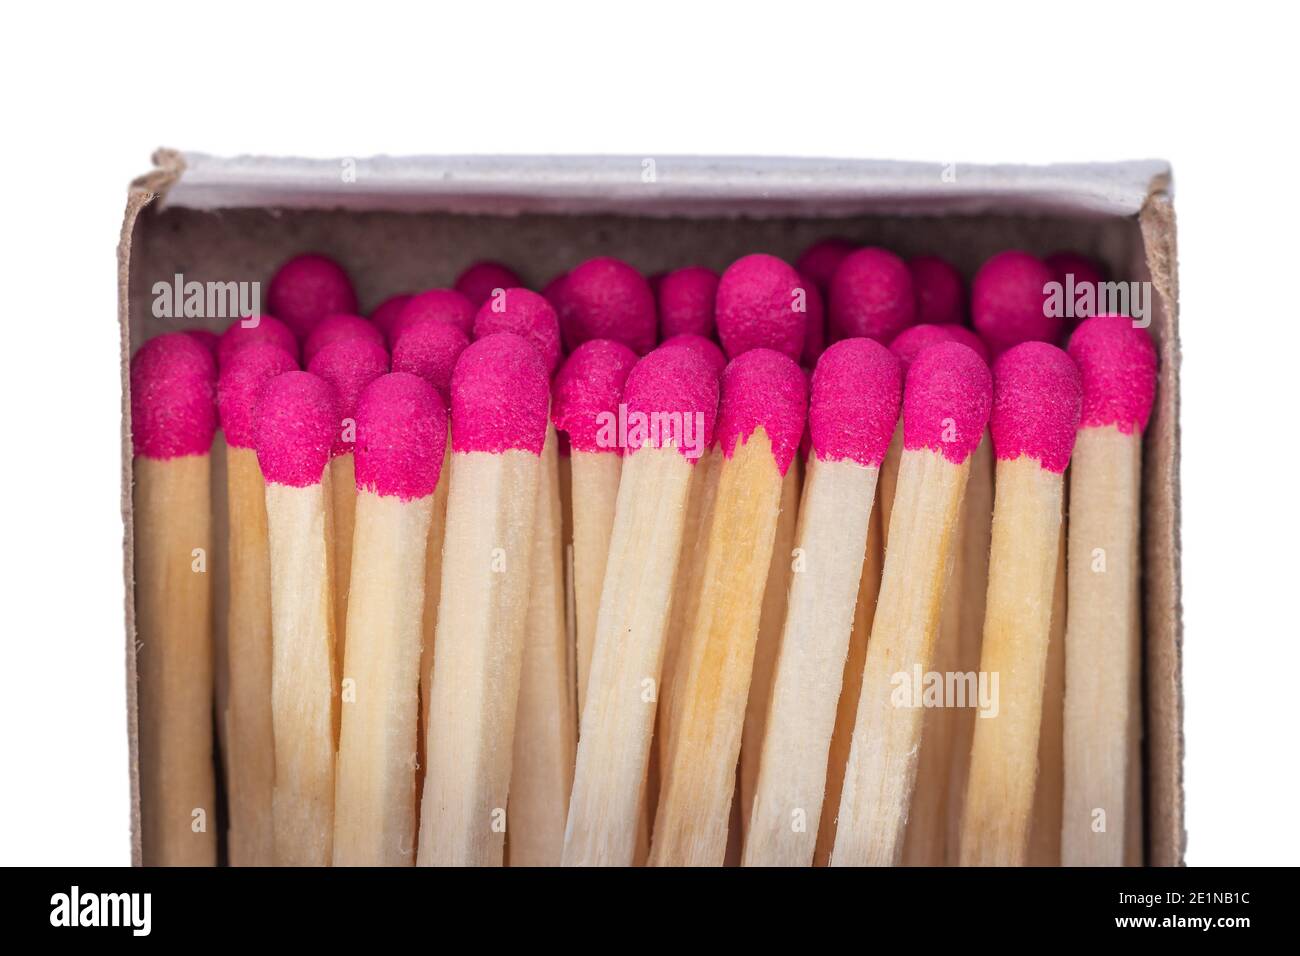 Close-up Macro of Pink Wood Stick Matches in a Box Stock Image - Image of  light, background: 71105929